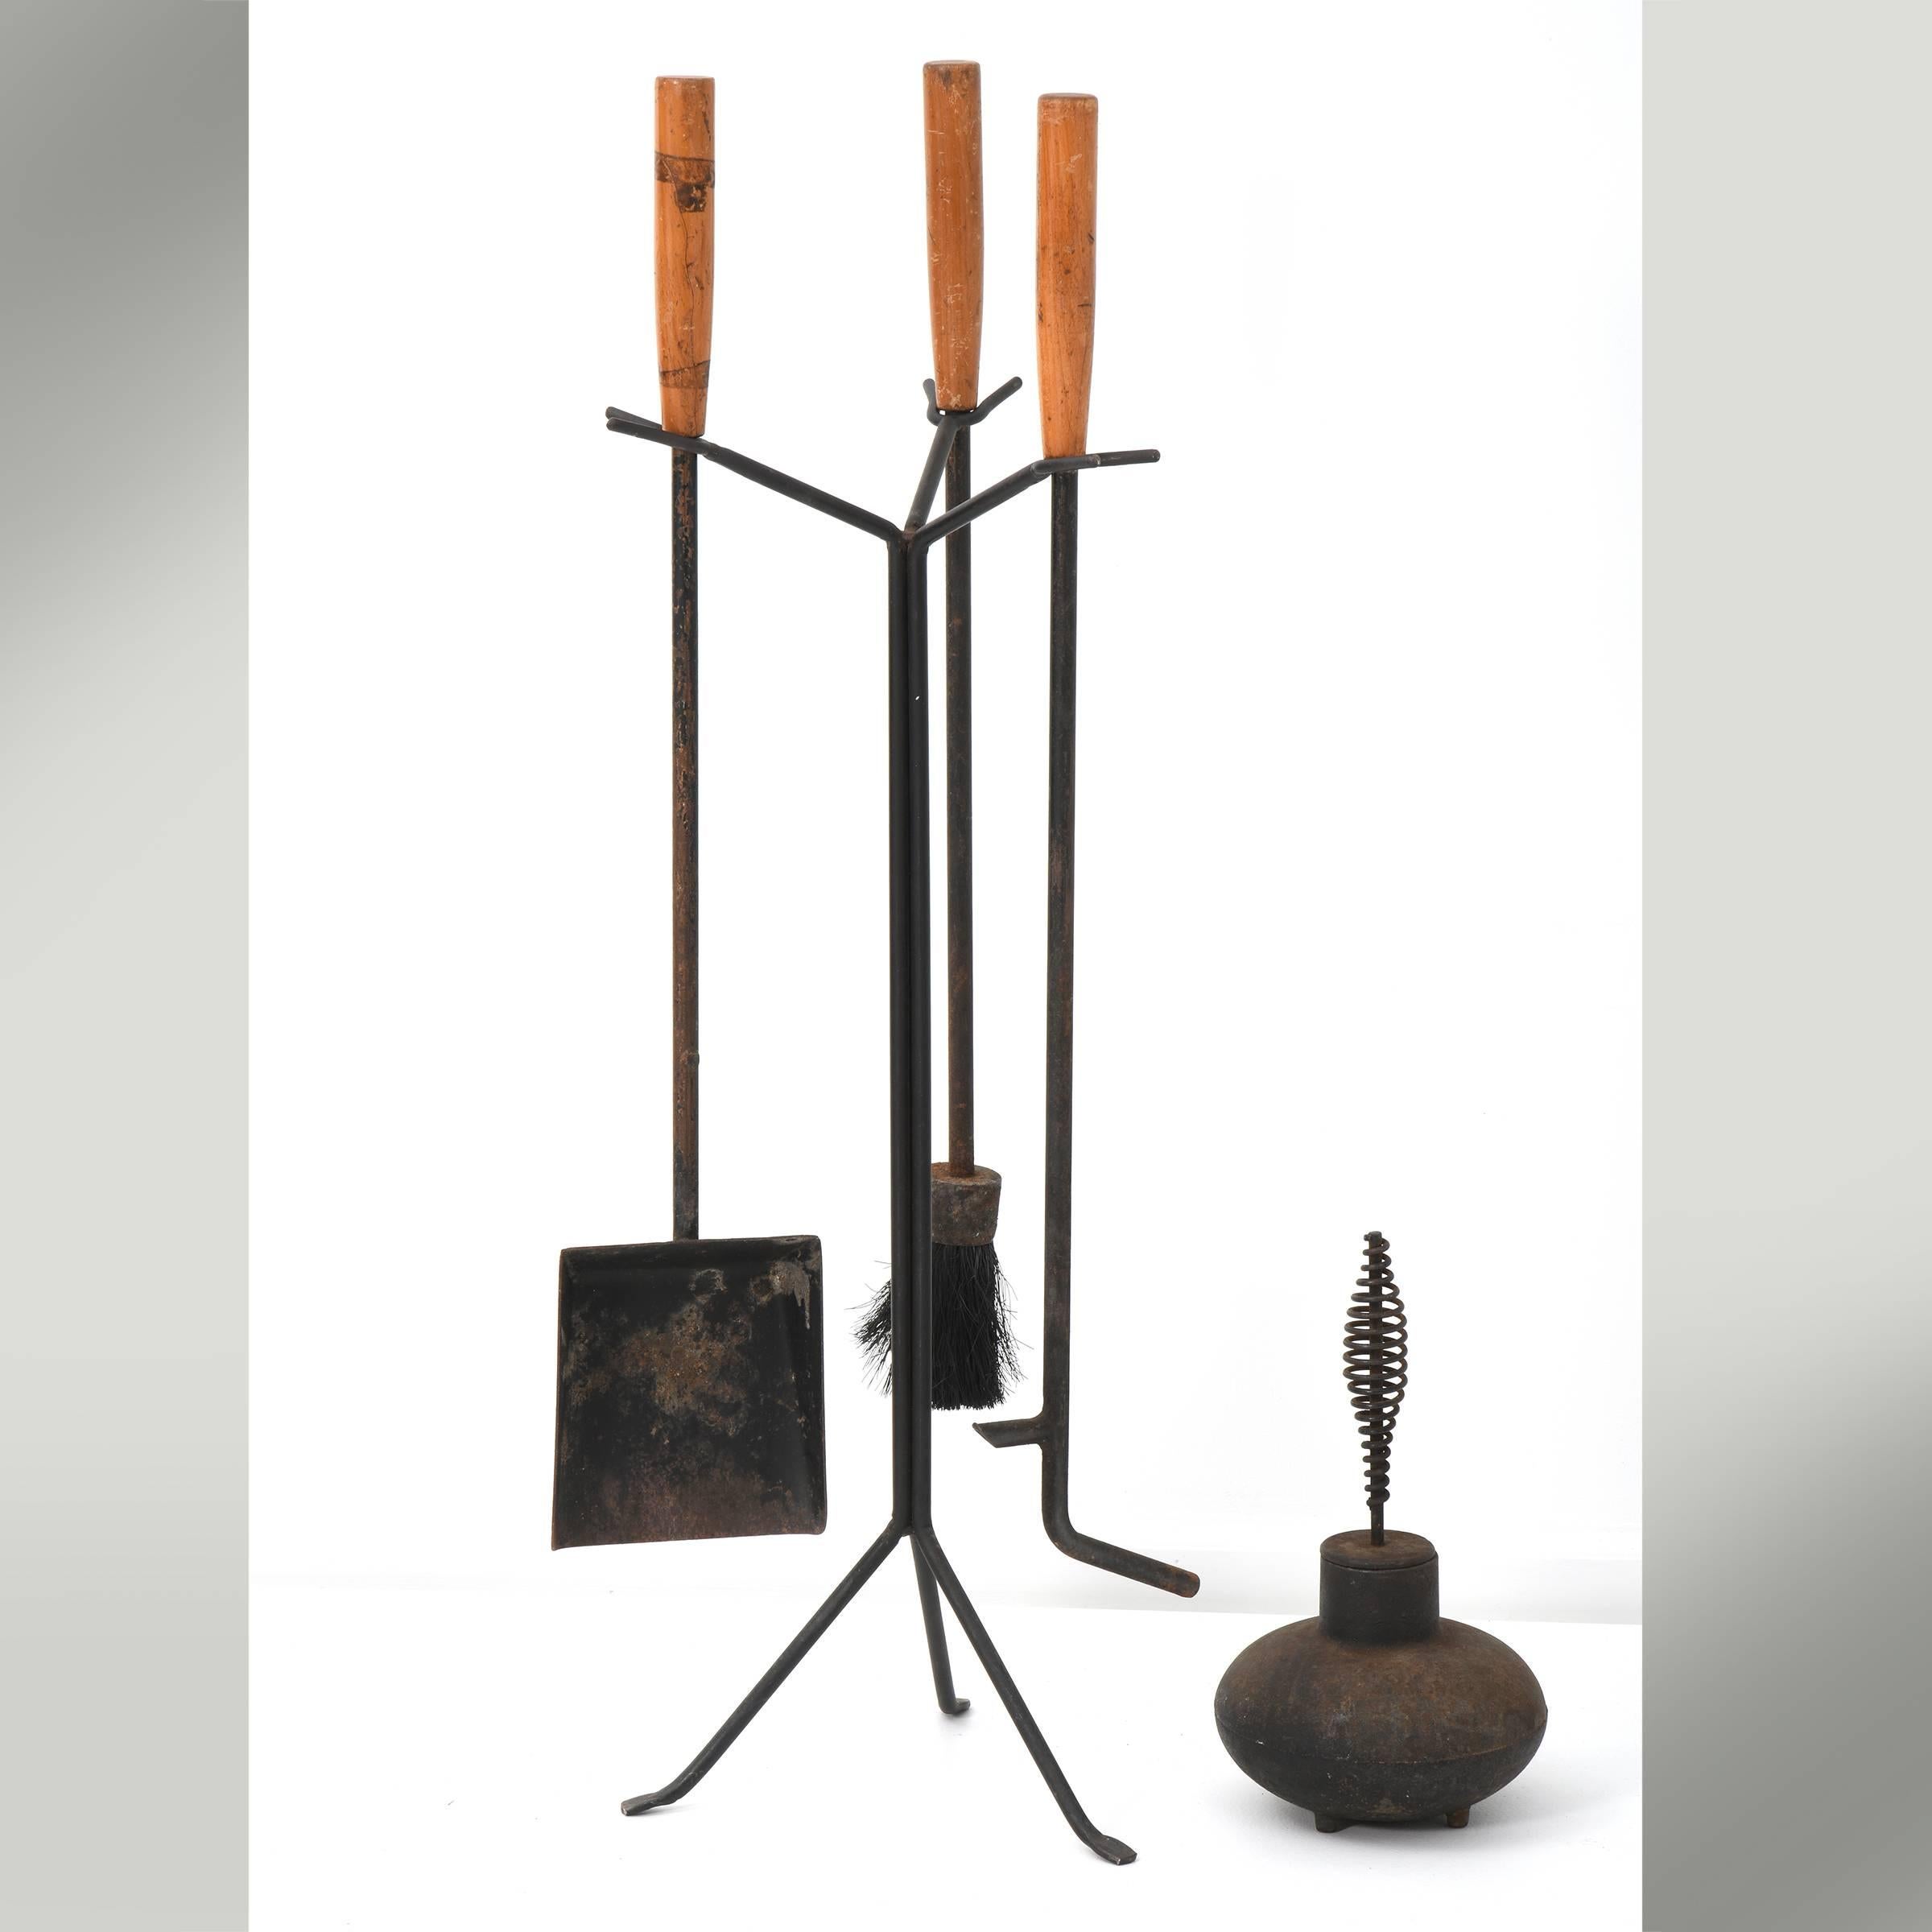 Irving Harper / George Nelson Assoc. for Howard Miller

USA, 1951

Fireplace tool set and stand, including poker, hearth broom, and shovel w/ birchwood handles.

Measure: 33.5 H x 13.5 W x 13.5 D in
27 H x 10.5 W in (base only)

Original